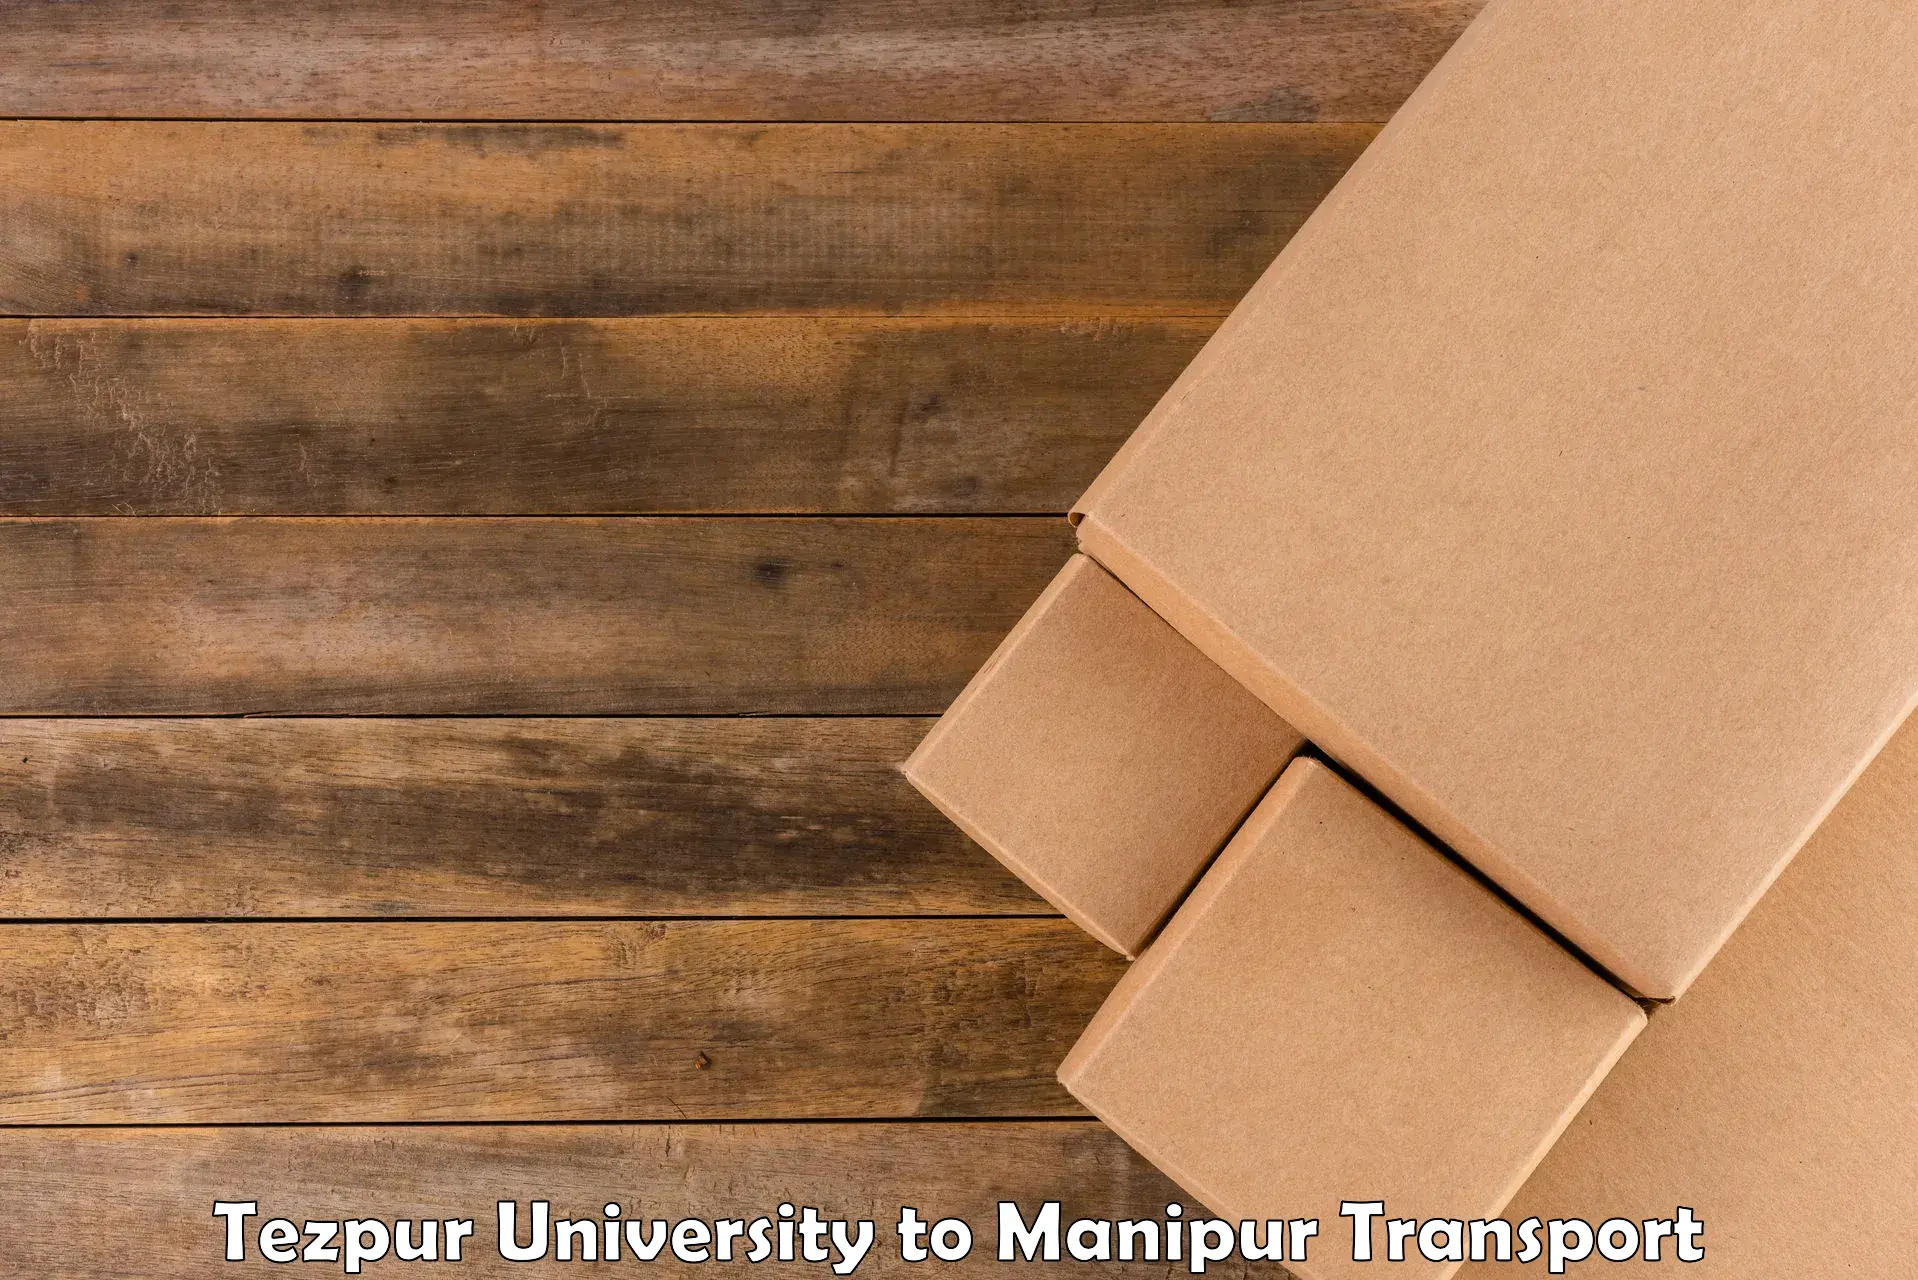 Goods delivery service Tezpur University to Imphal